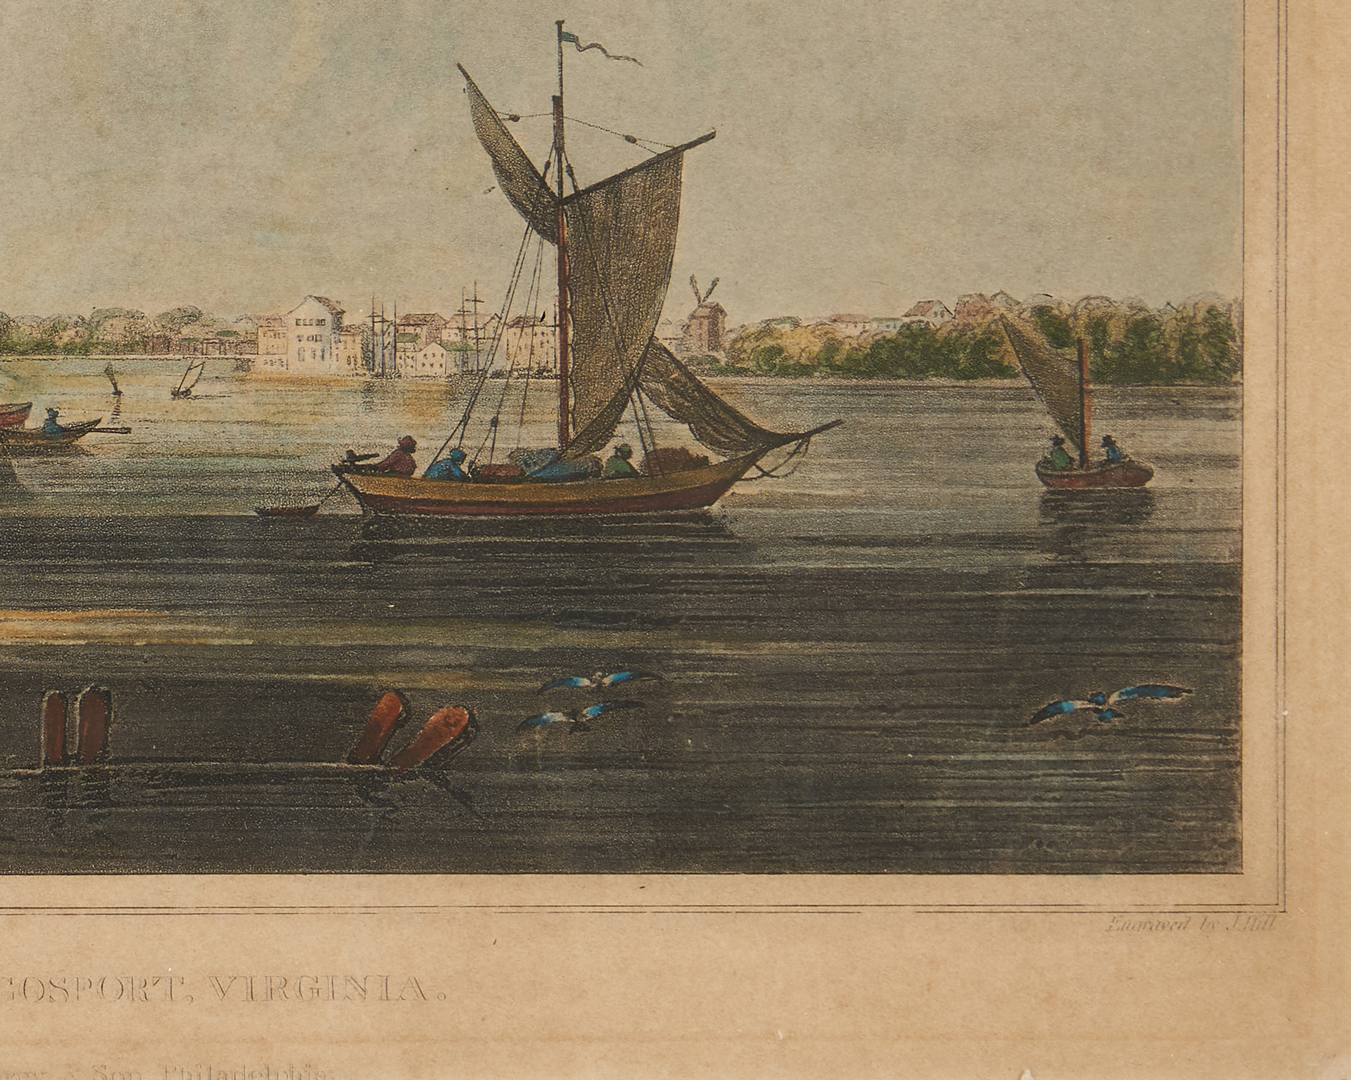 Lot 127: View of Norfolk from Cosport Virginia c. 1820